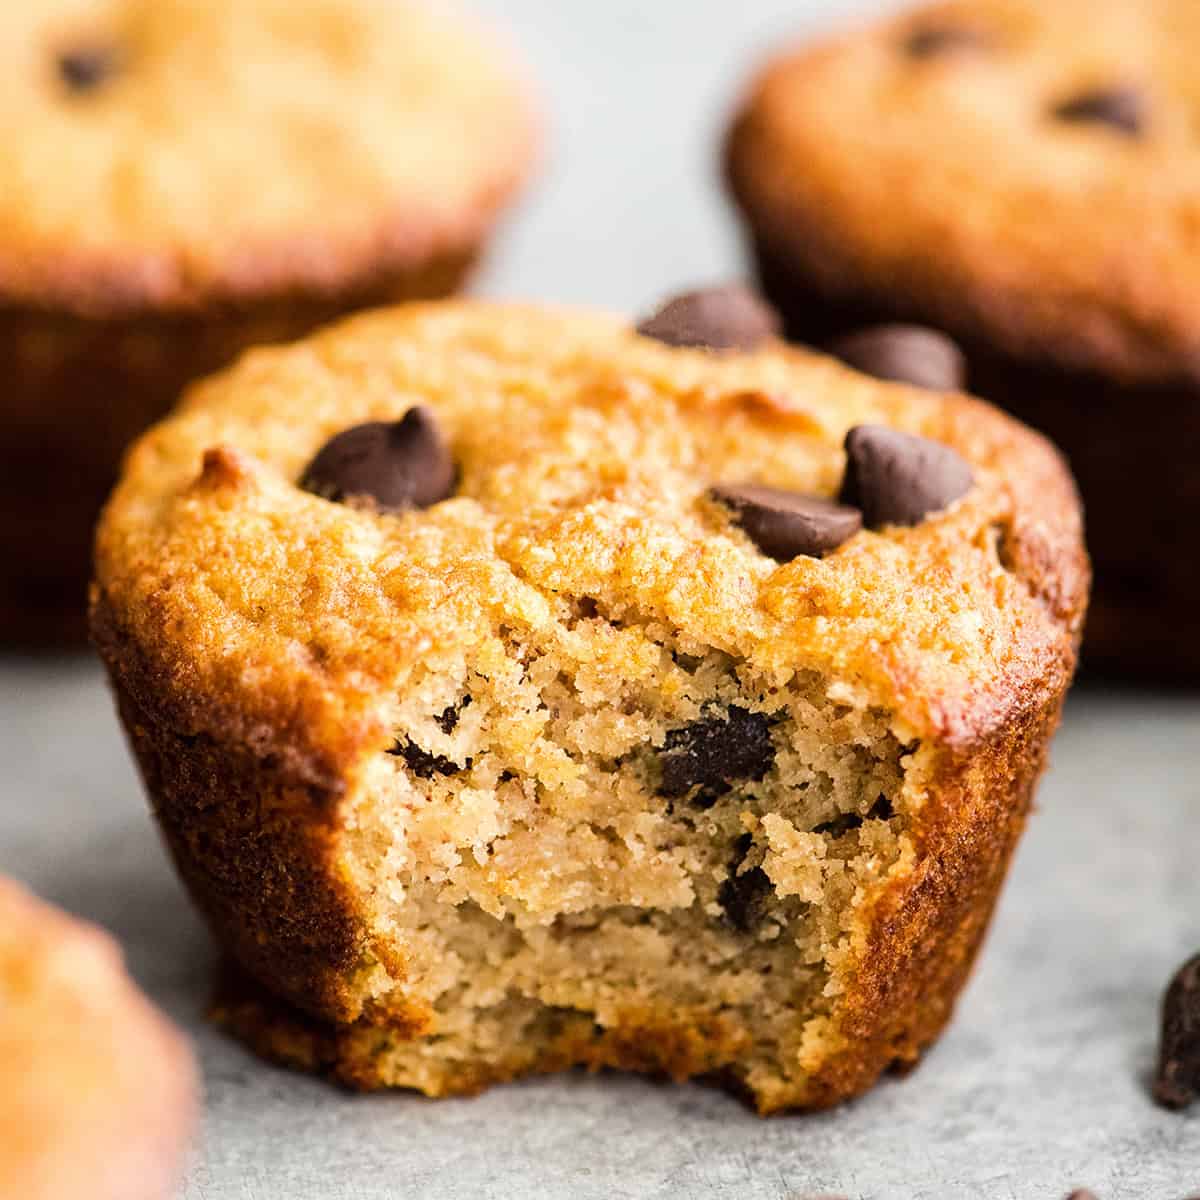 a Gluten Free Chocolate Chip Muffin with a bite taken out of it